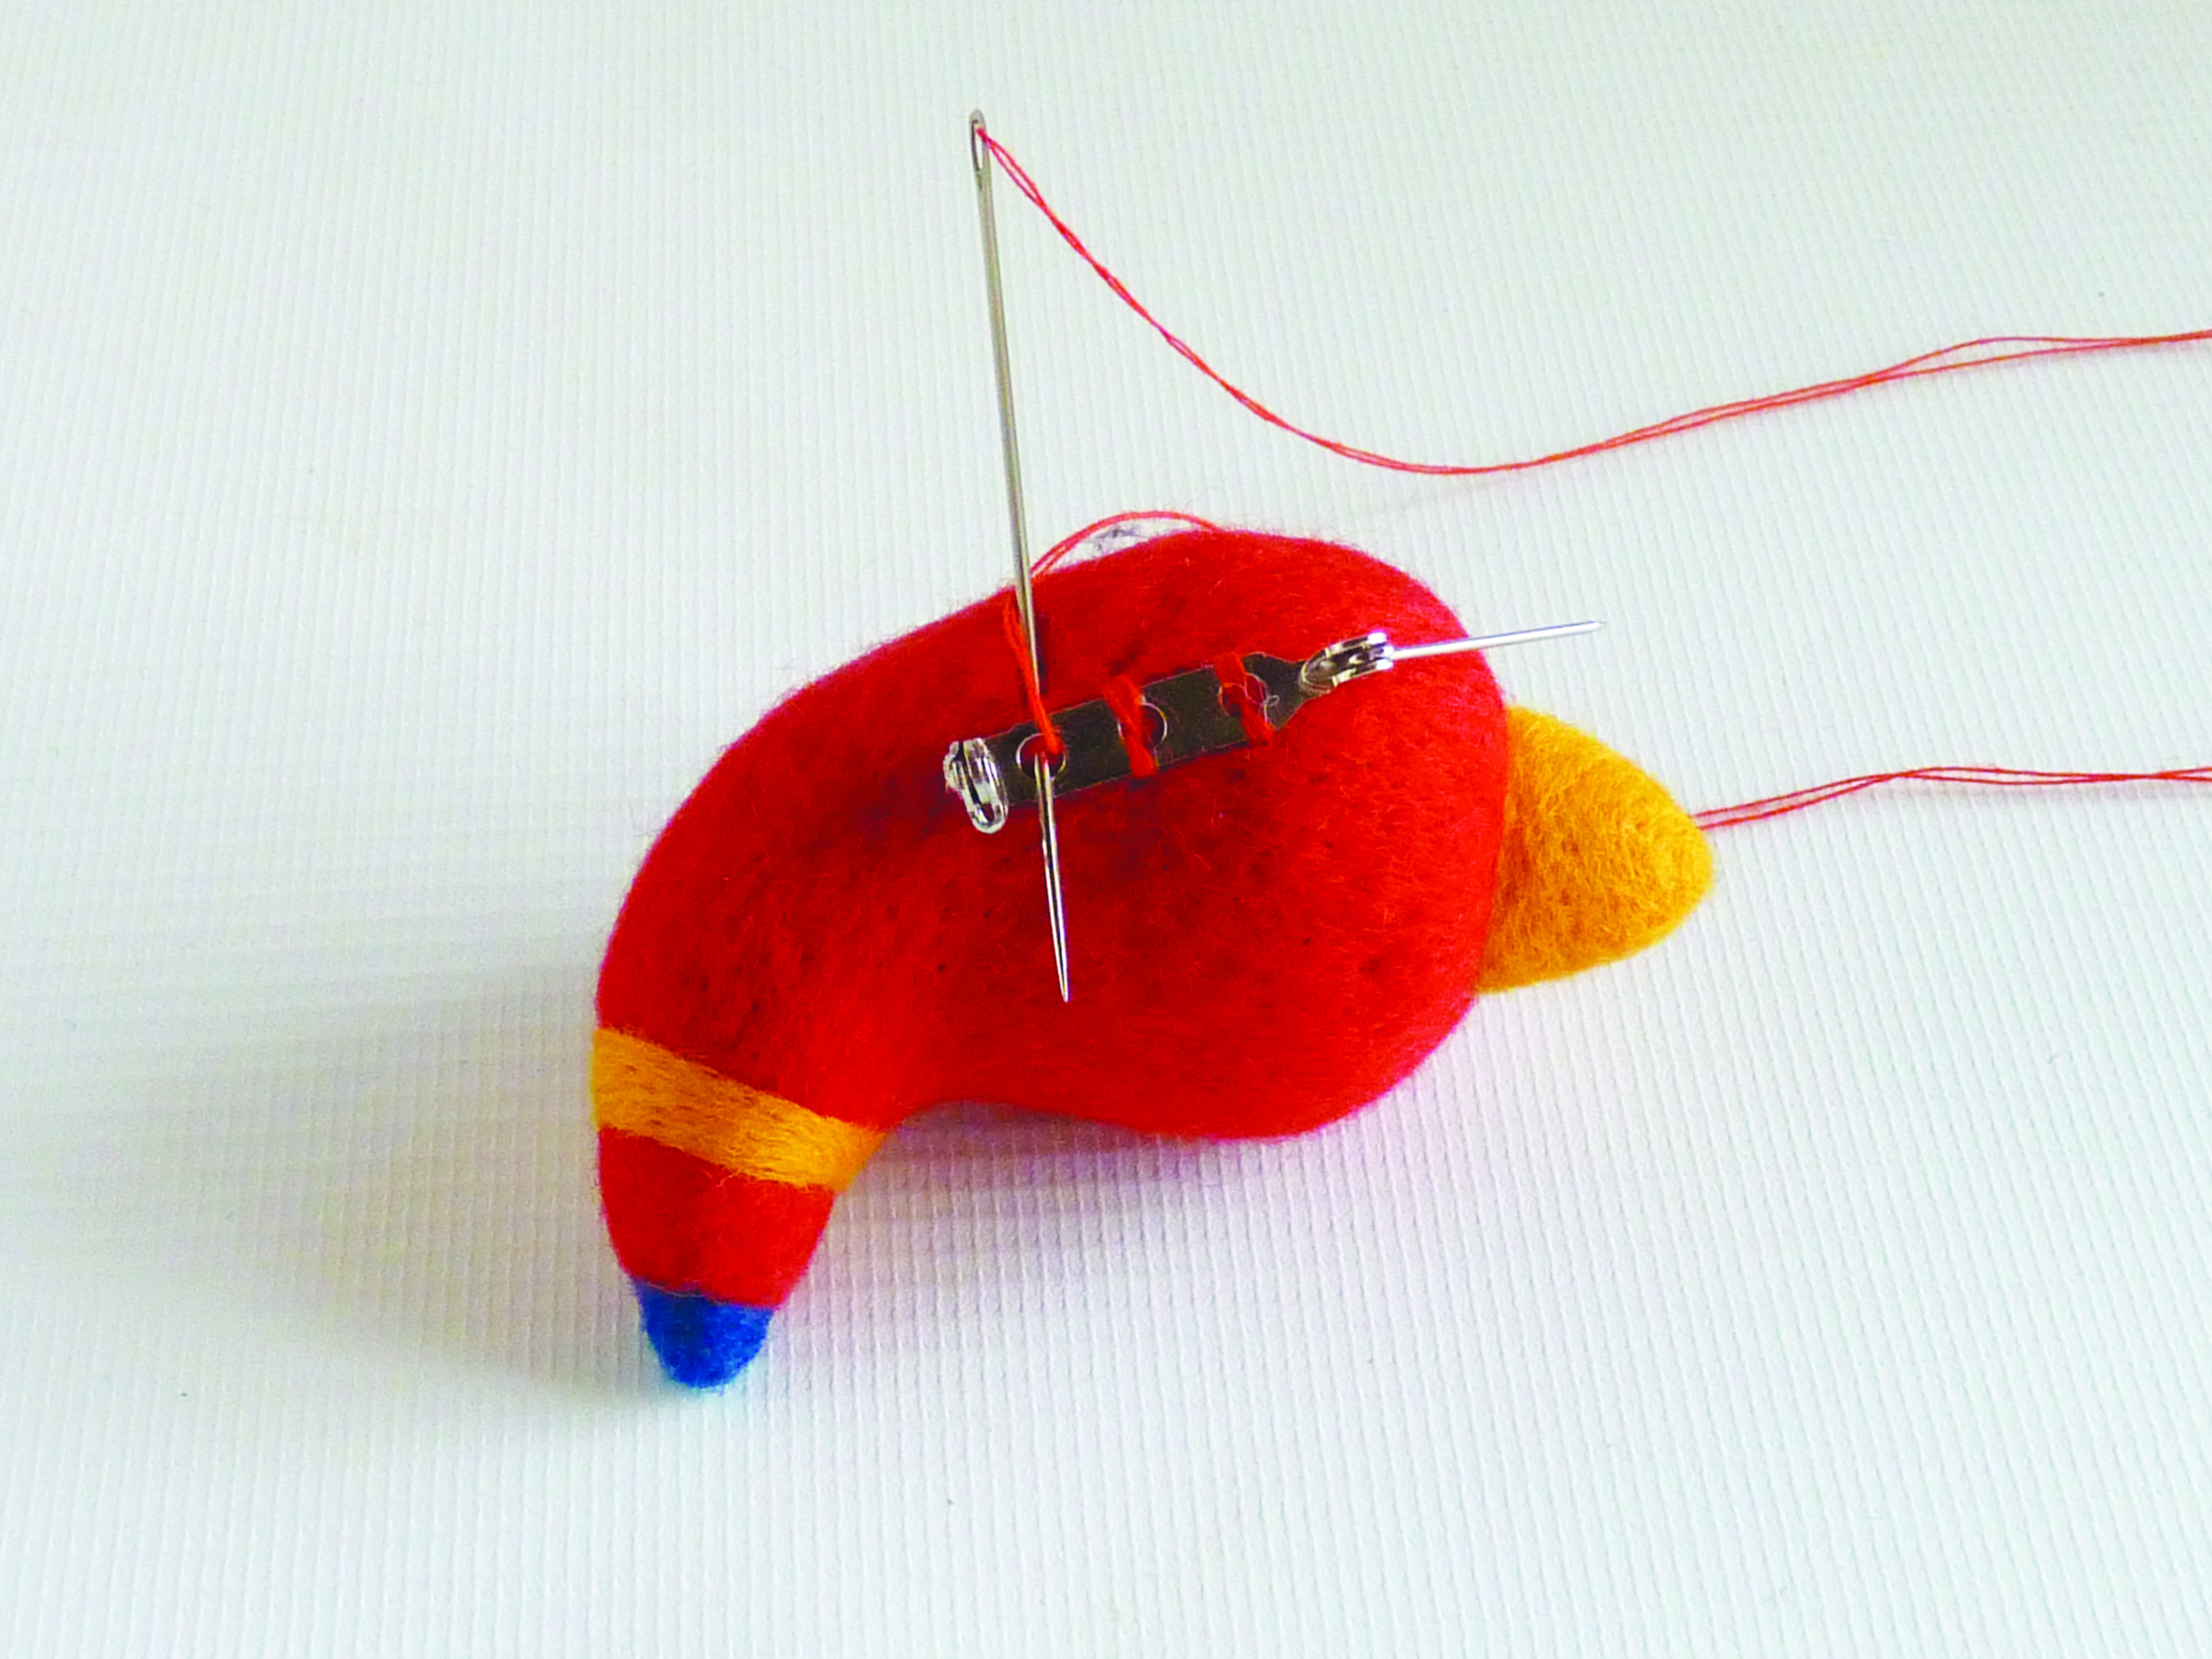 Beginner’s guide to needle felting, how to sew on a brooch pin, step 1